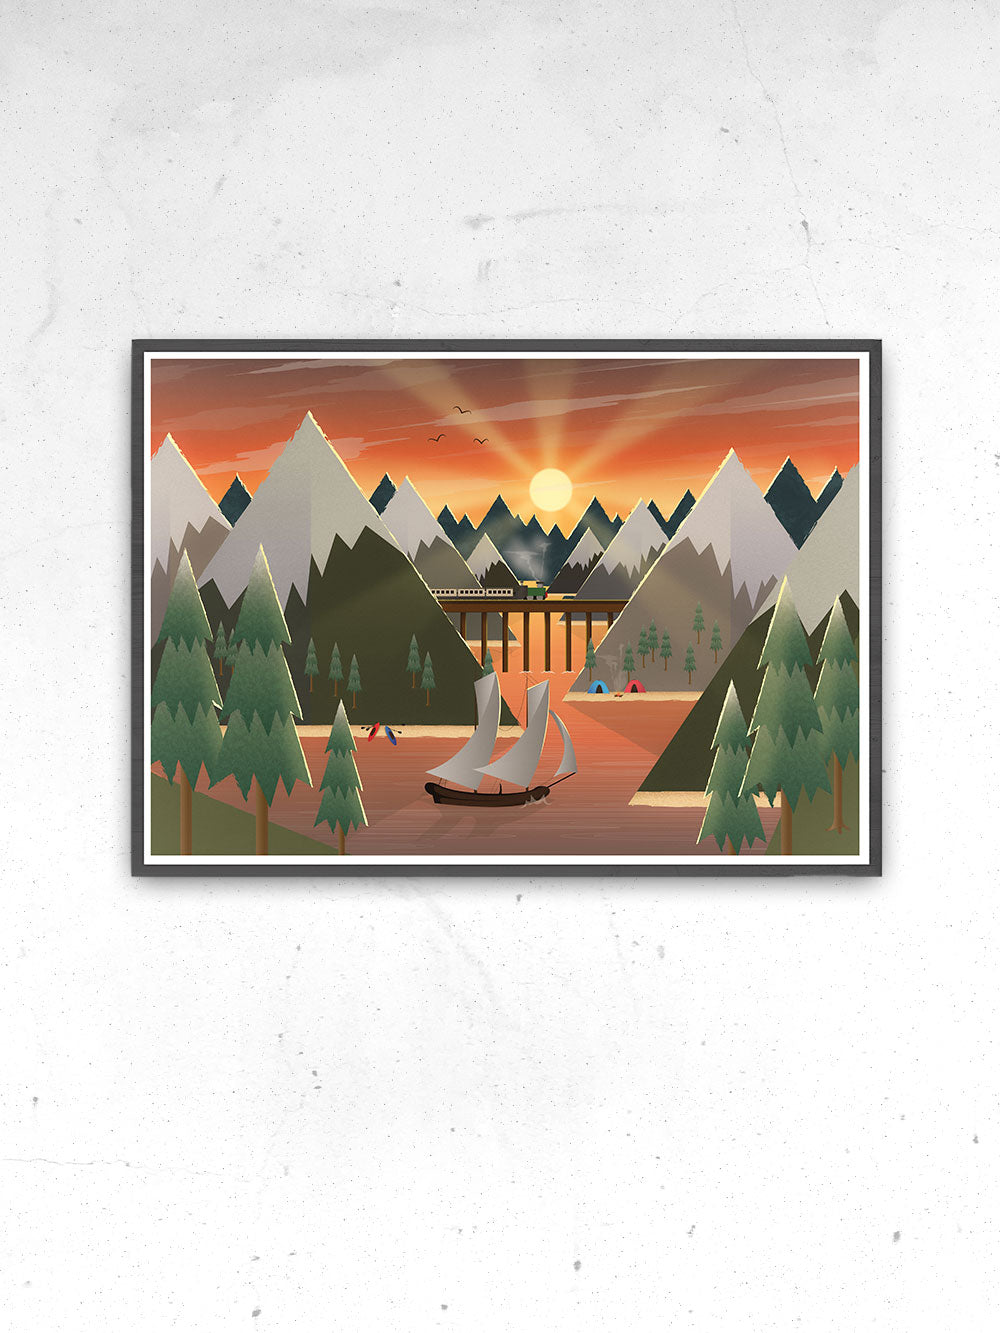 Sunset Lake Illustration Art for Kids in a frame on a wall